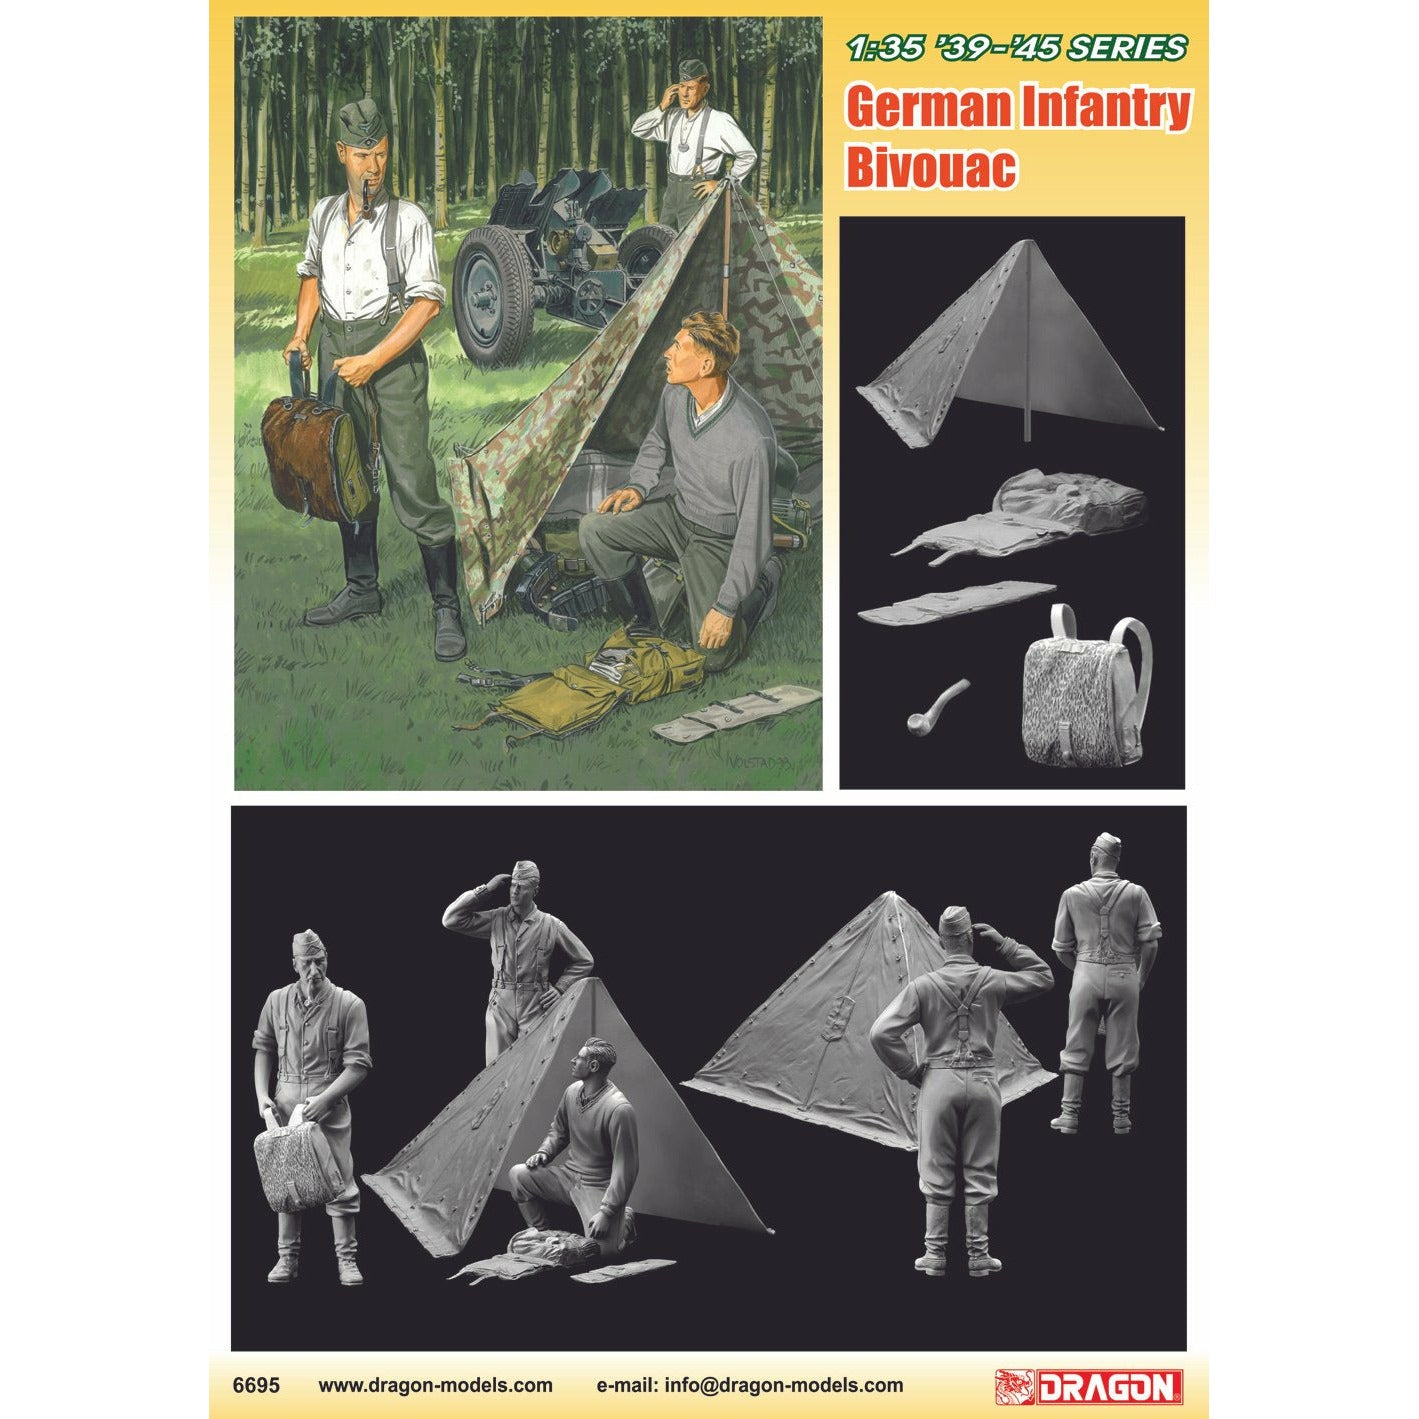 ‘39-45’ Series German Wehrmacht Bivouac 1/35 #6695 by Dragon Models